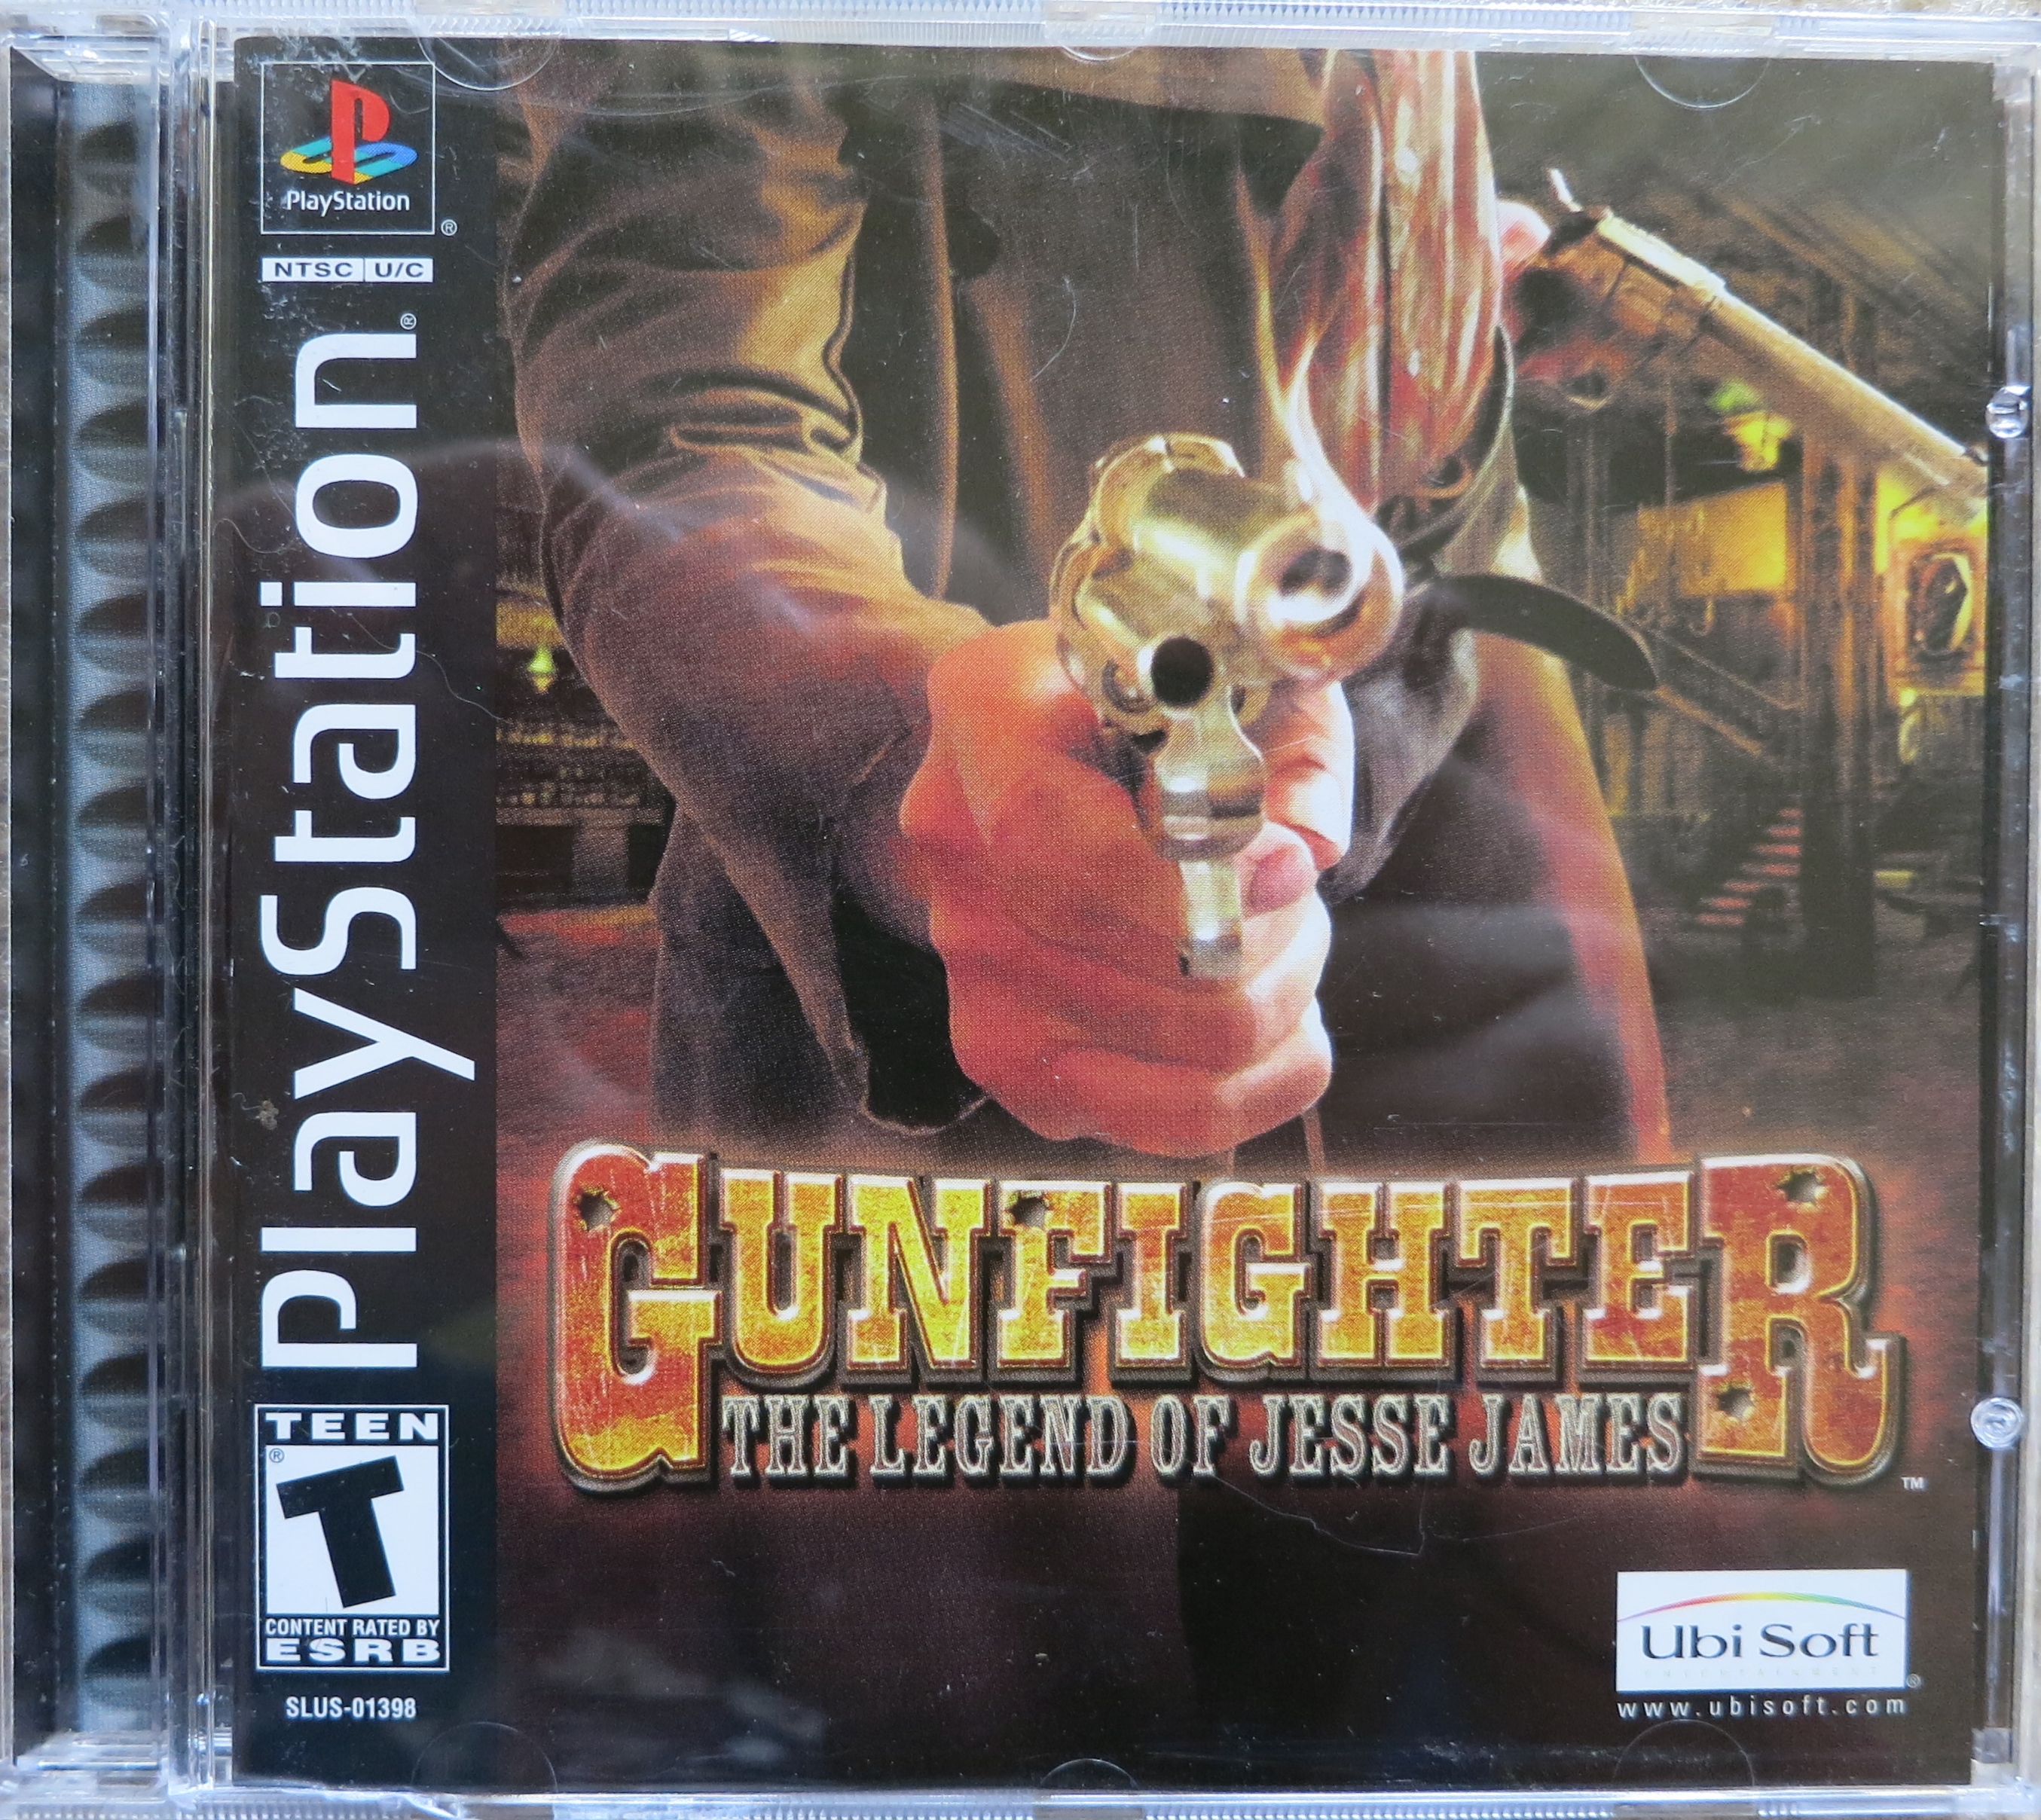 Gunfighter The Legend of Jesse James Cover